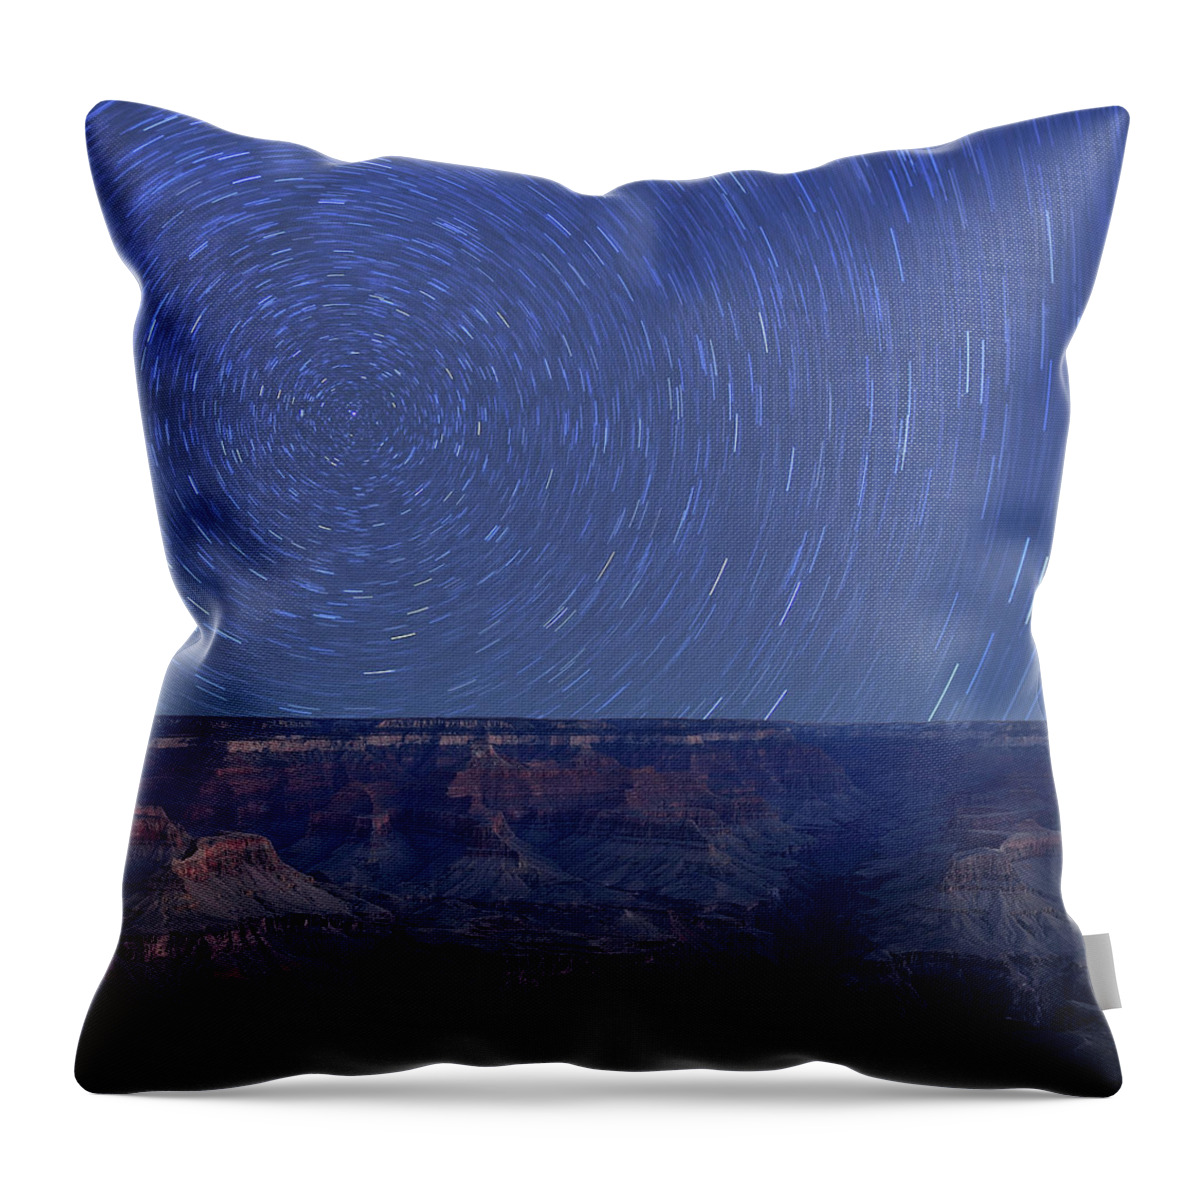 Geology Throw Pillow featuring the photograph Starring Night At Grand Canyon by Mengzhonghua Photography